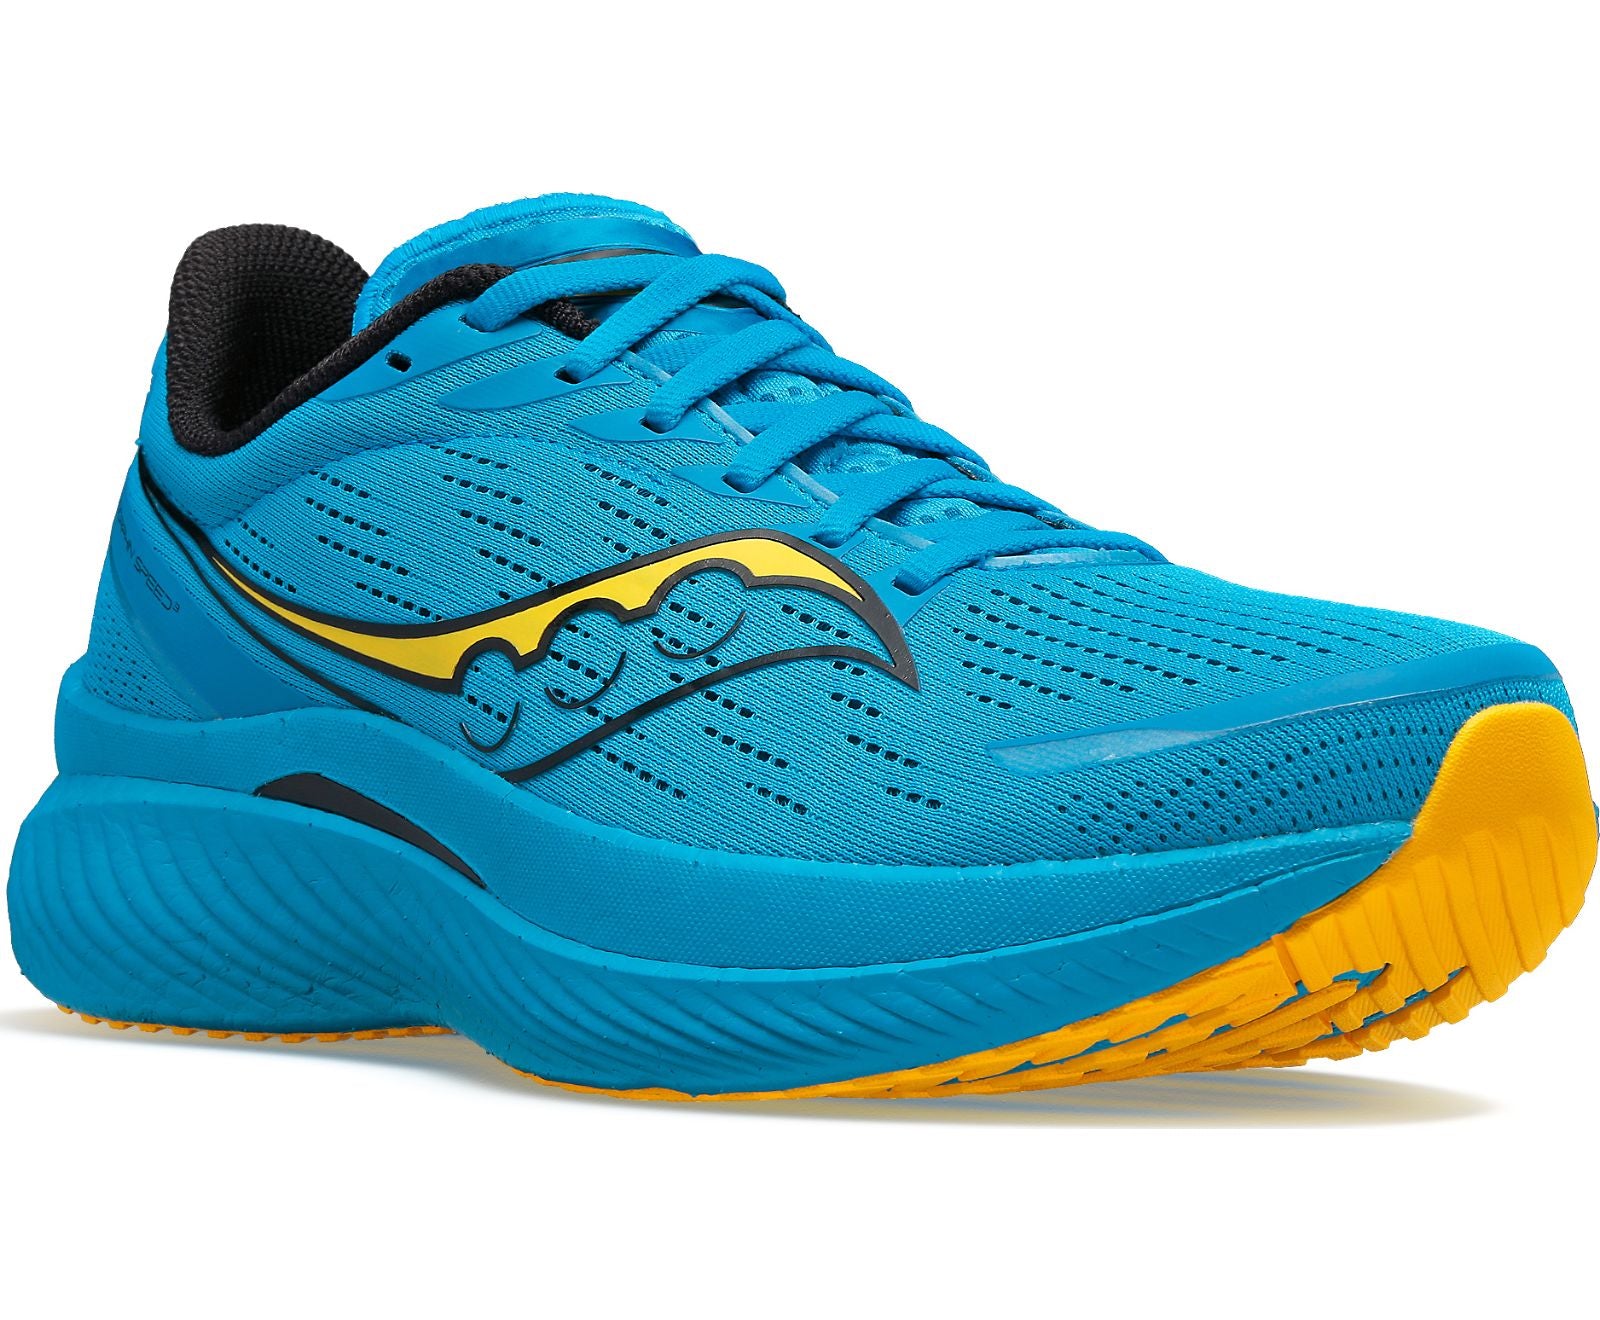 Front angled view of the Men's Endorphin Speed 3 by Saucony in the color Ocean/Vizigold